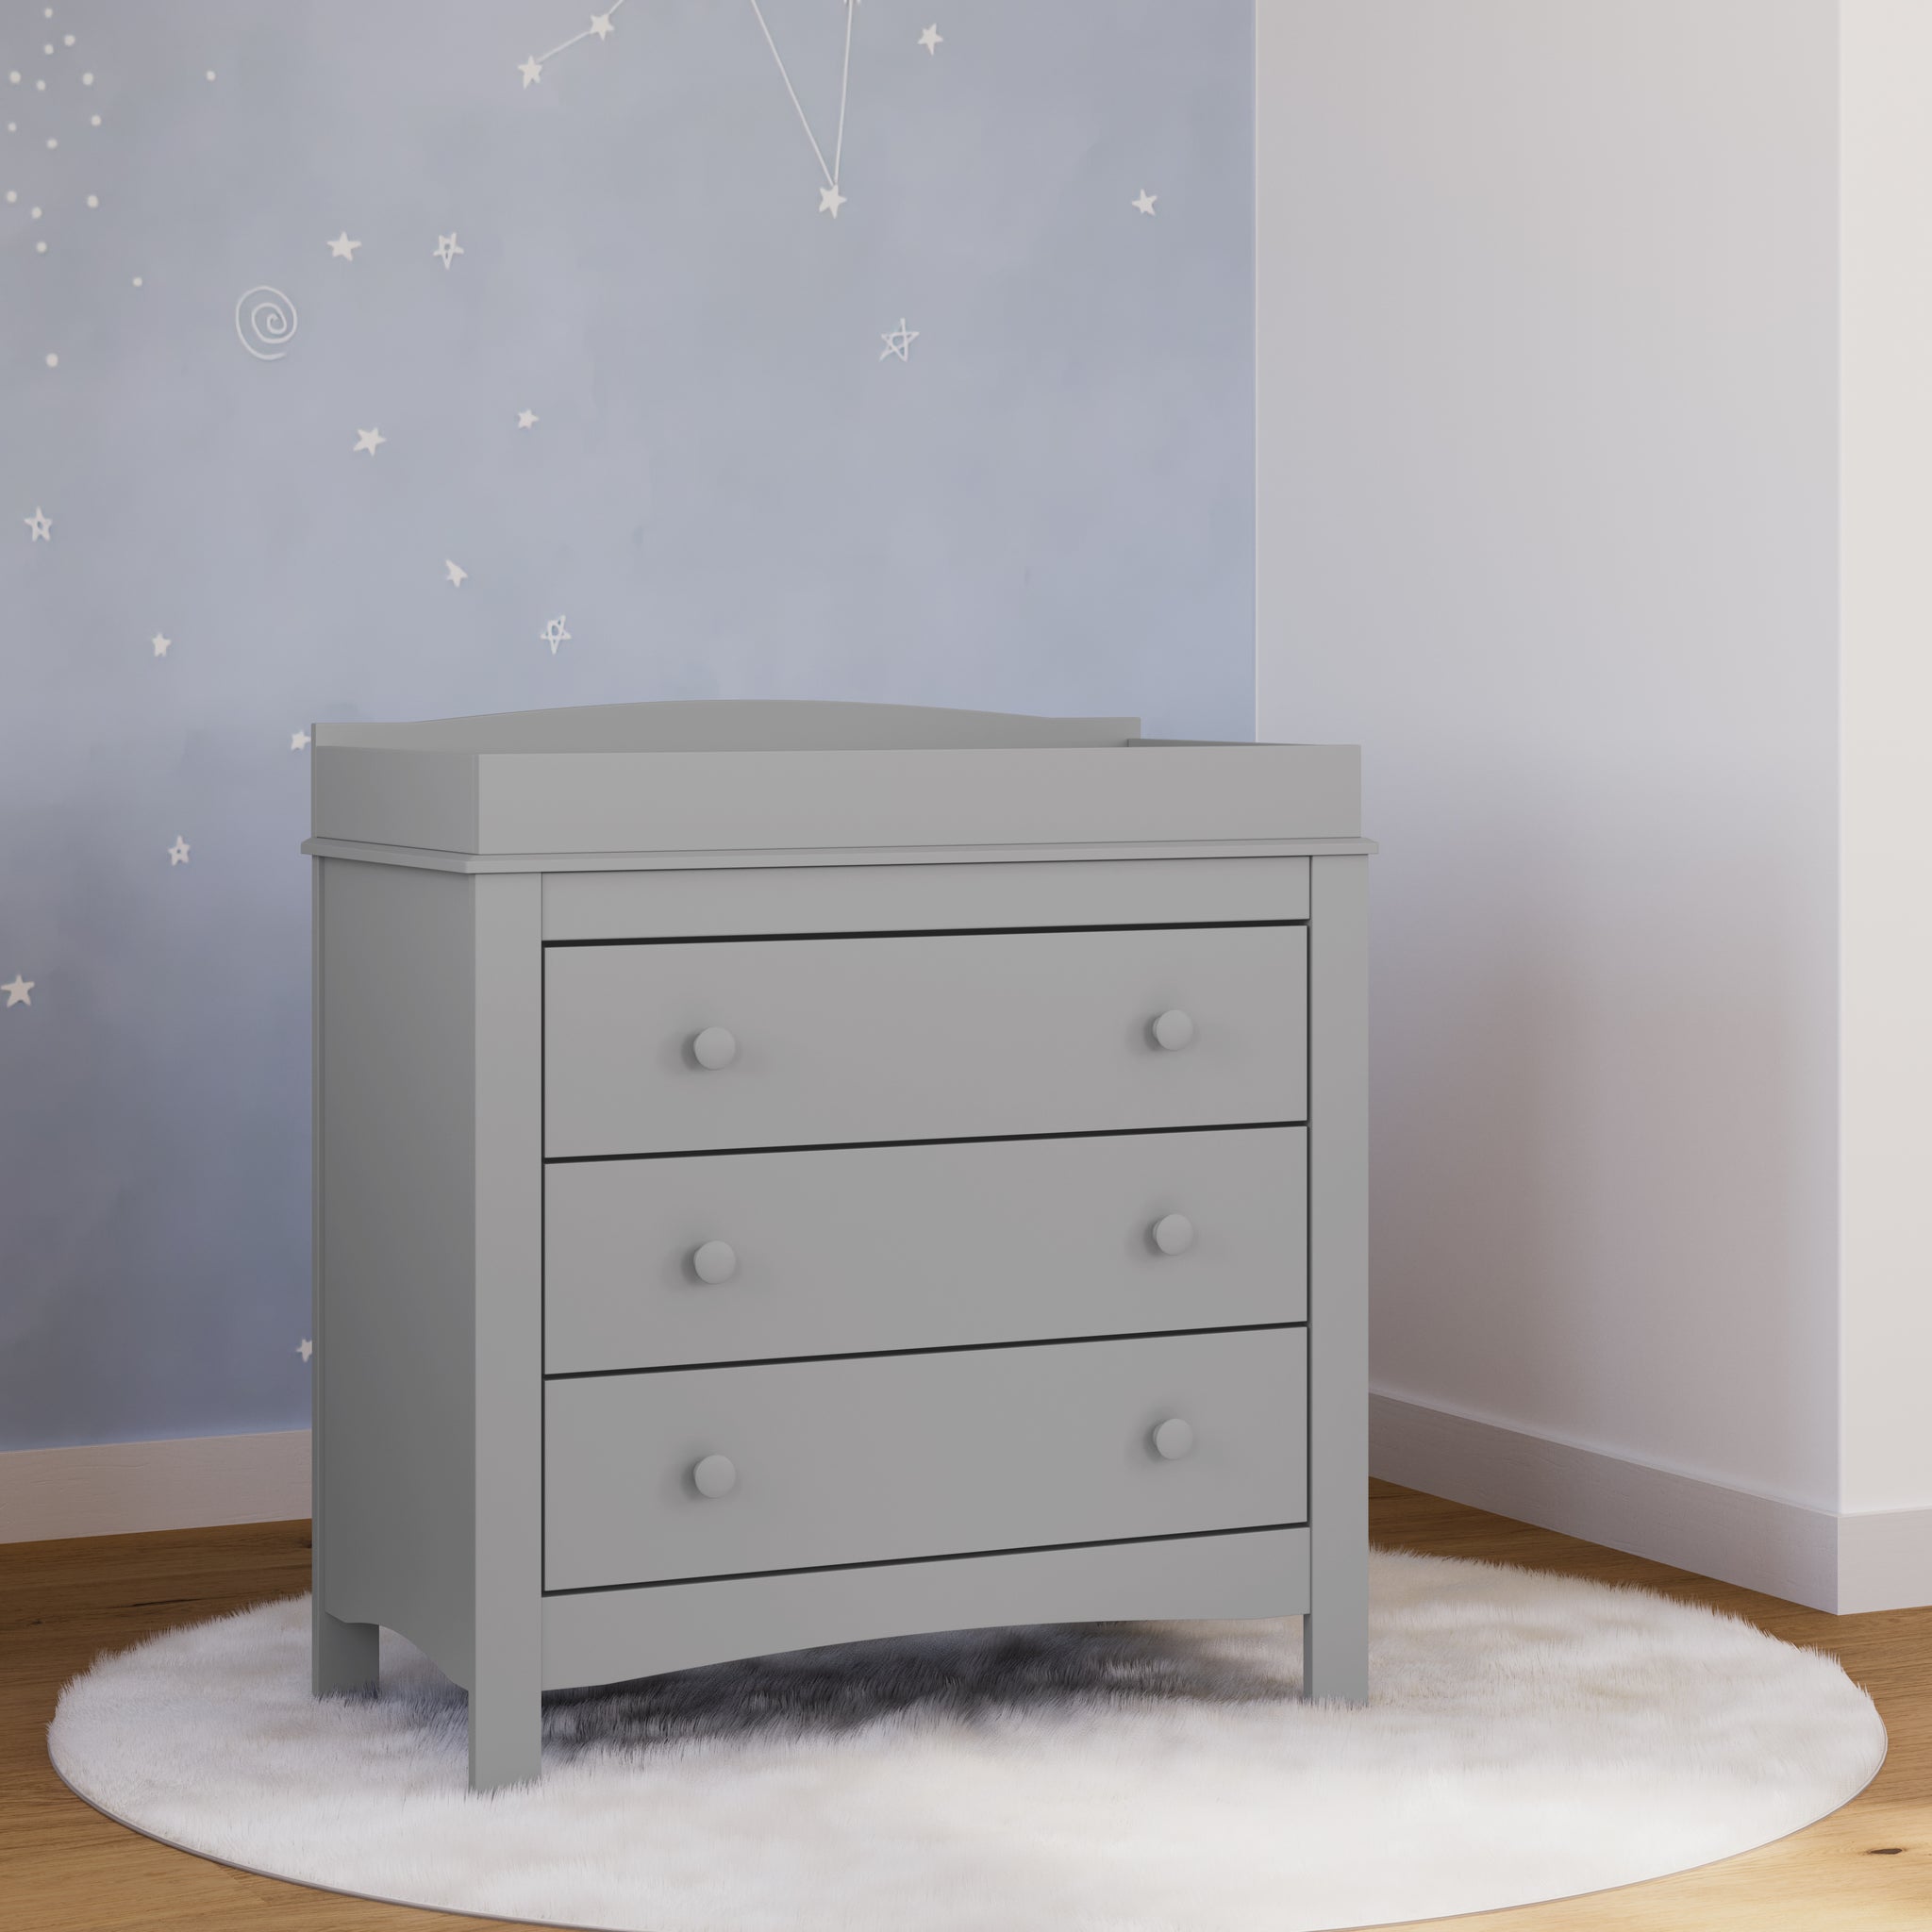 pebble gray 3 drawer chest with changing topper, in nursery